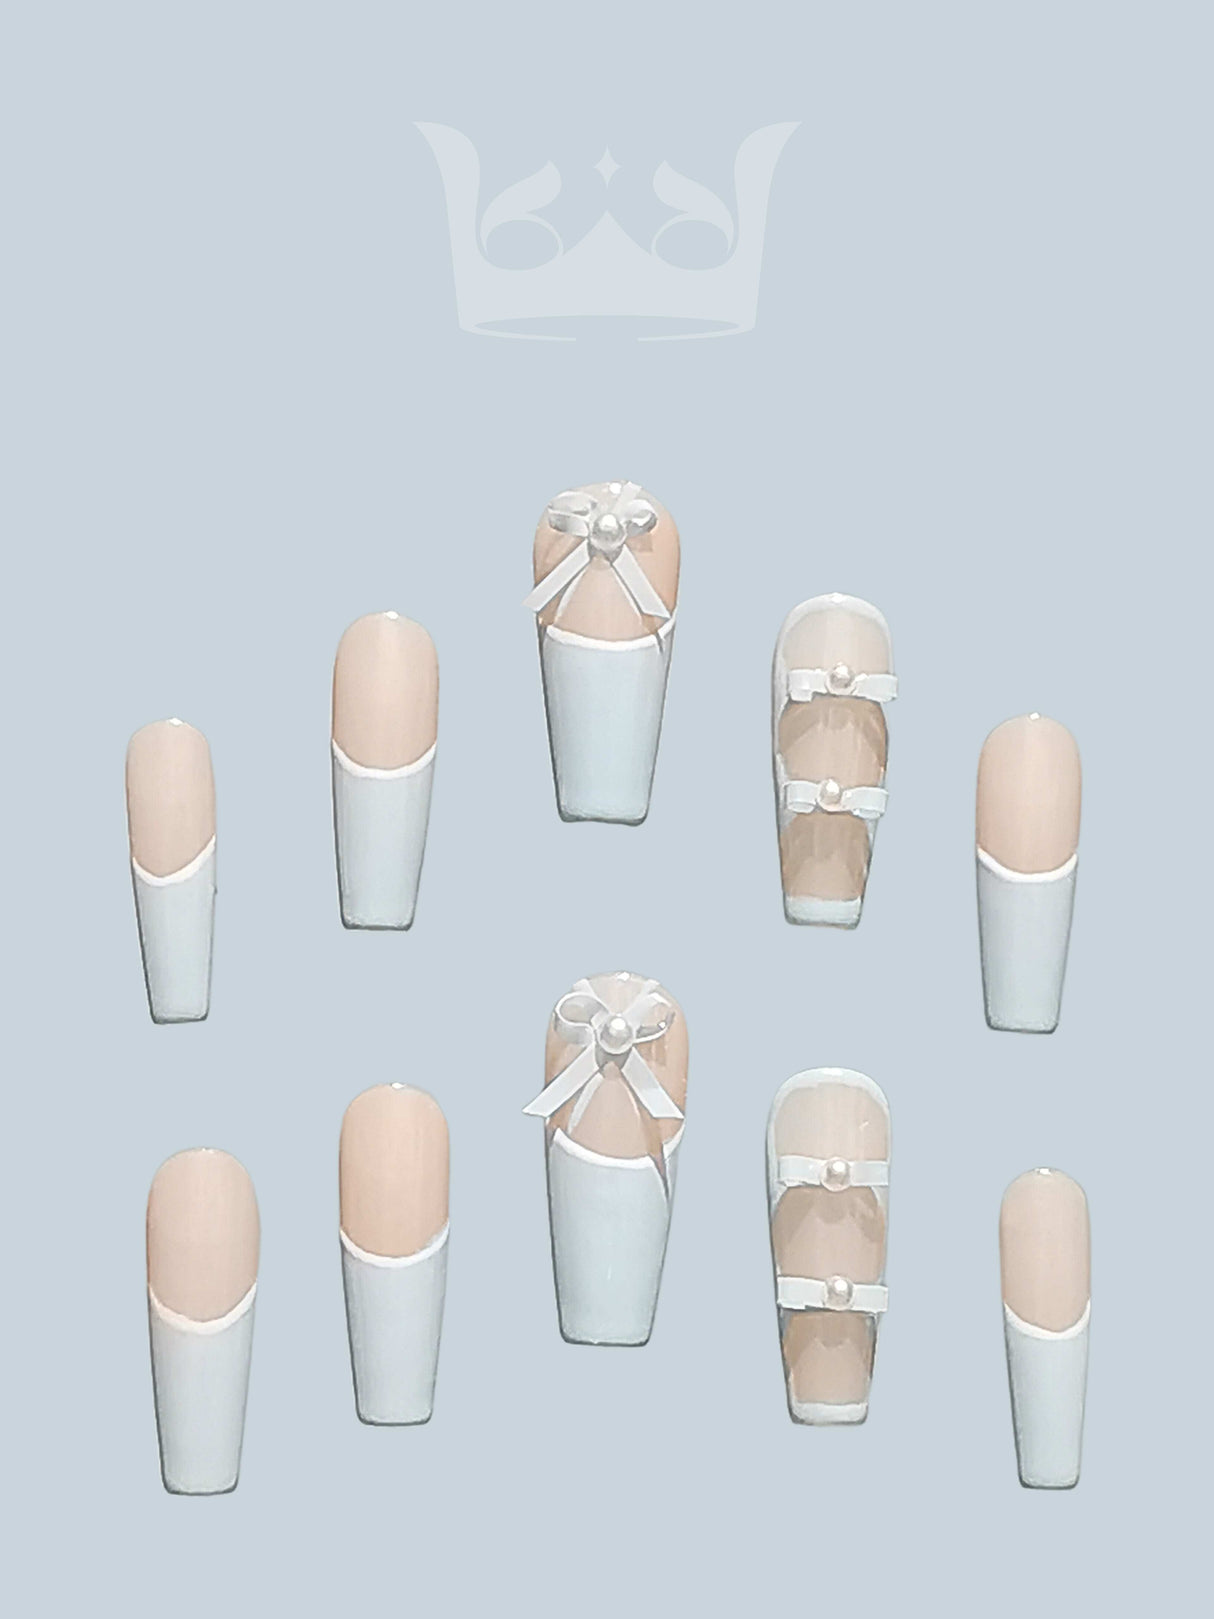 French manicure style nails with white tips and cute elements like white flowers and lace pattern add elegance and sophistication suitable for any occasion.